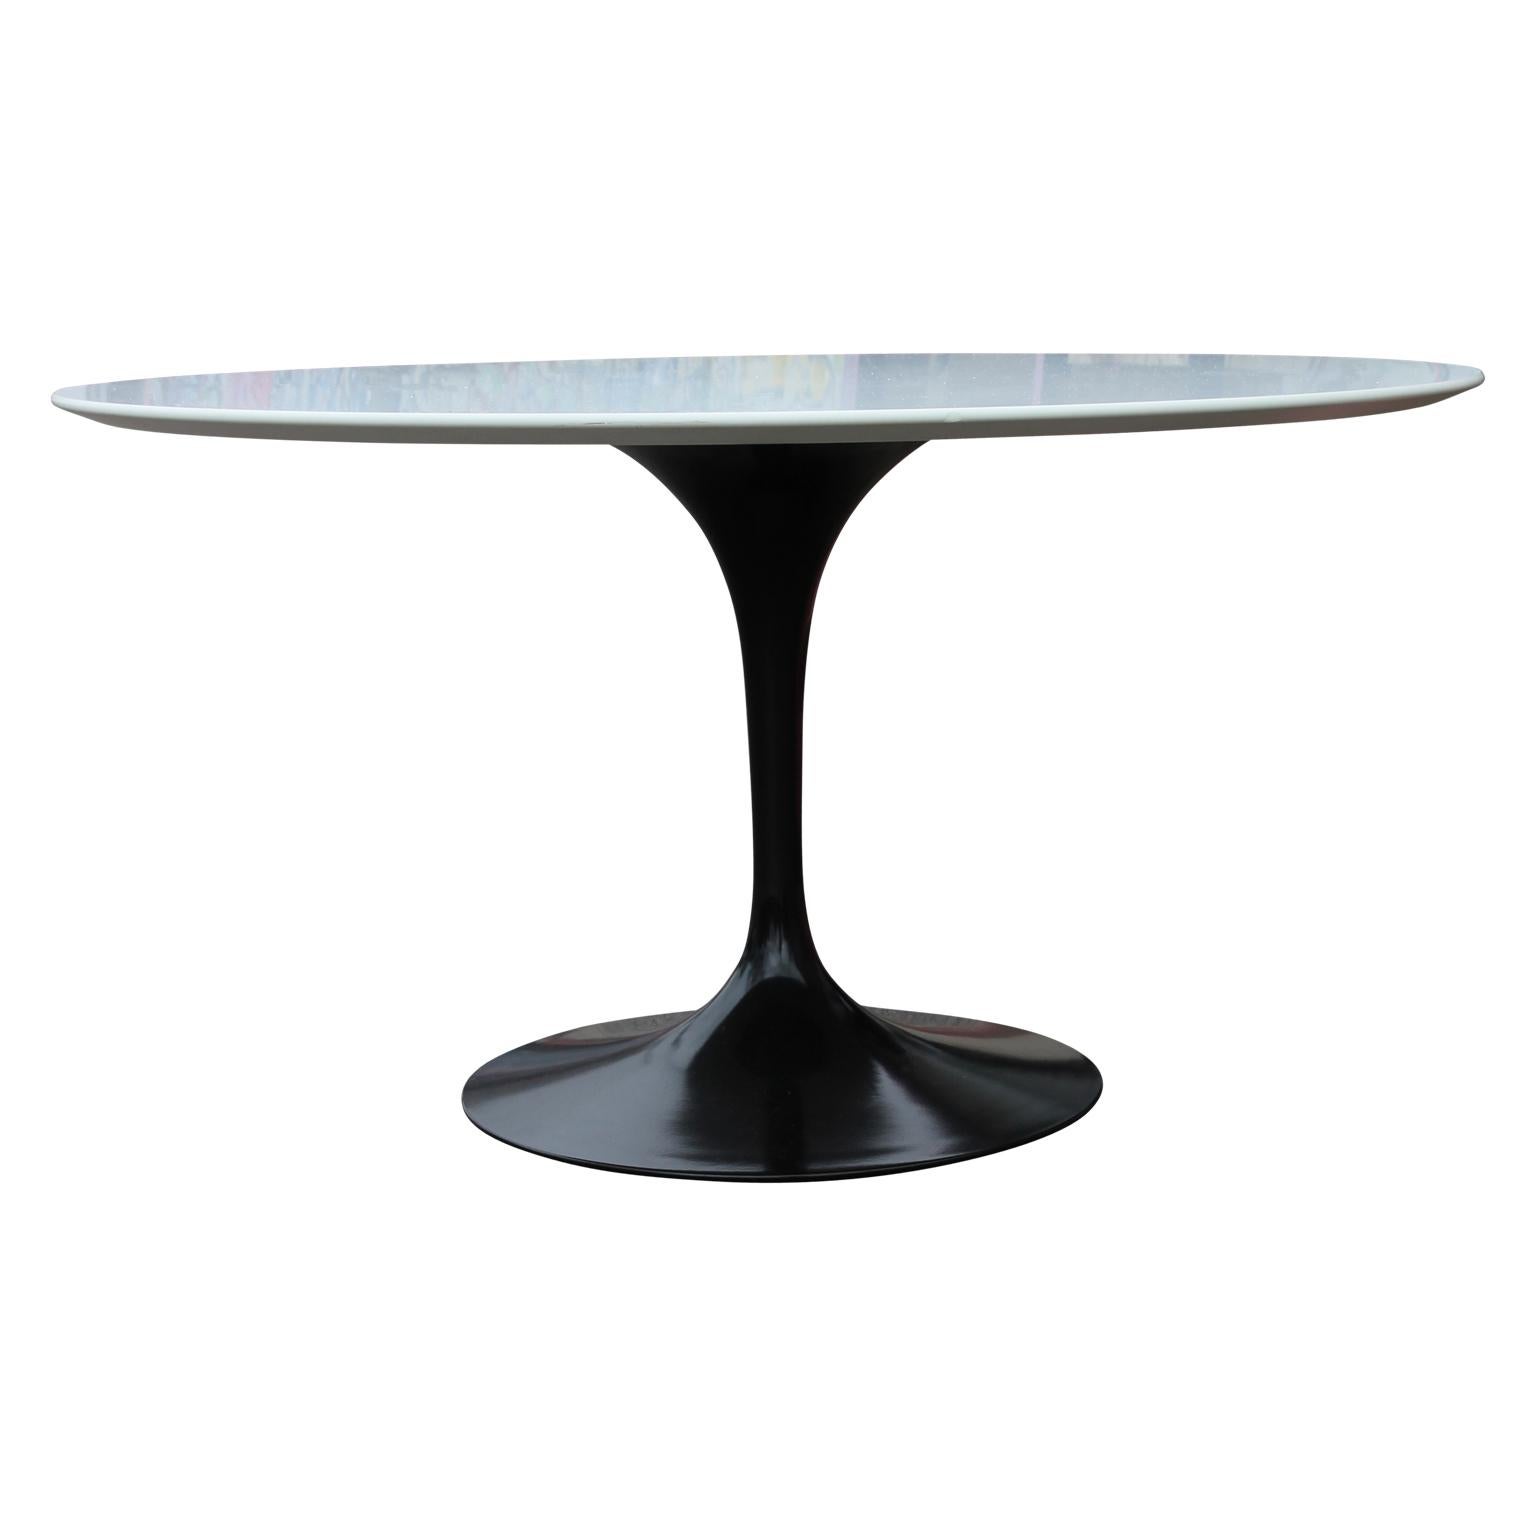 White toped Knoll tulip dining table with a sleek black aluminum base designed by Eero Saarinen. The table is in great condition and has a diameter of 54 inches.